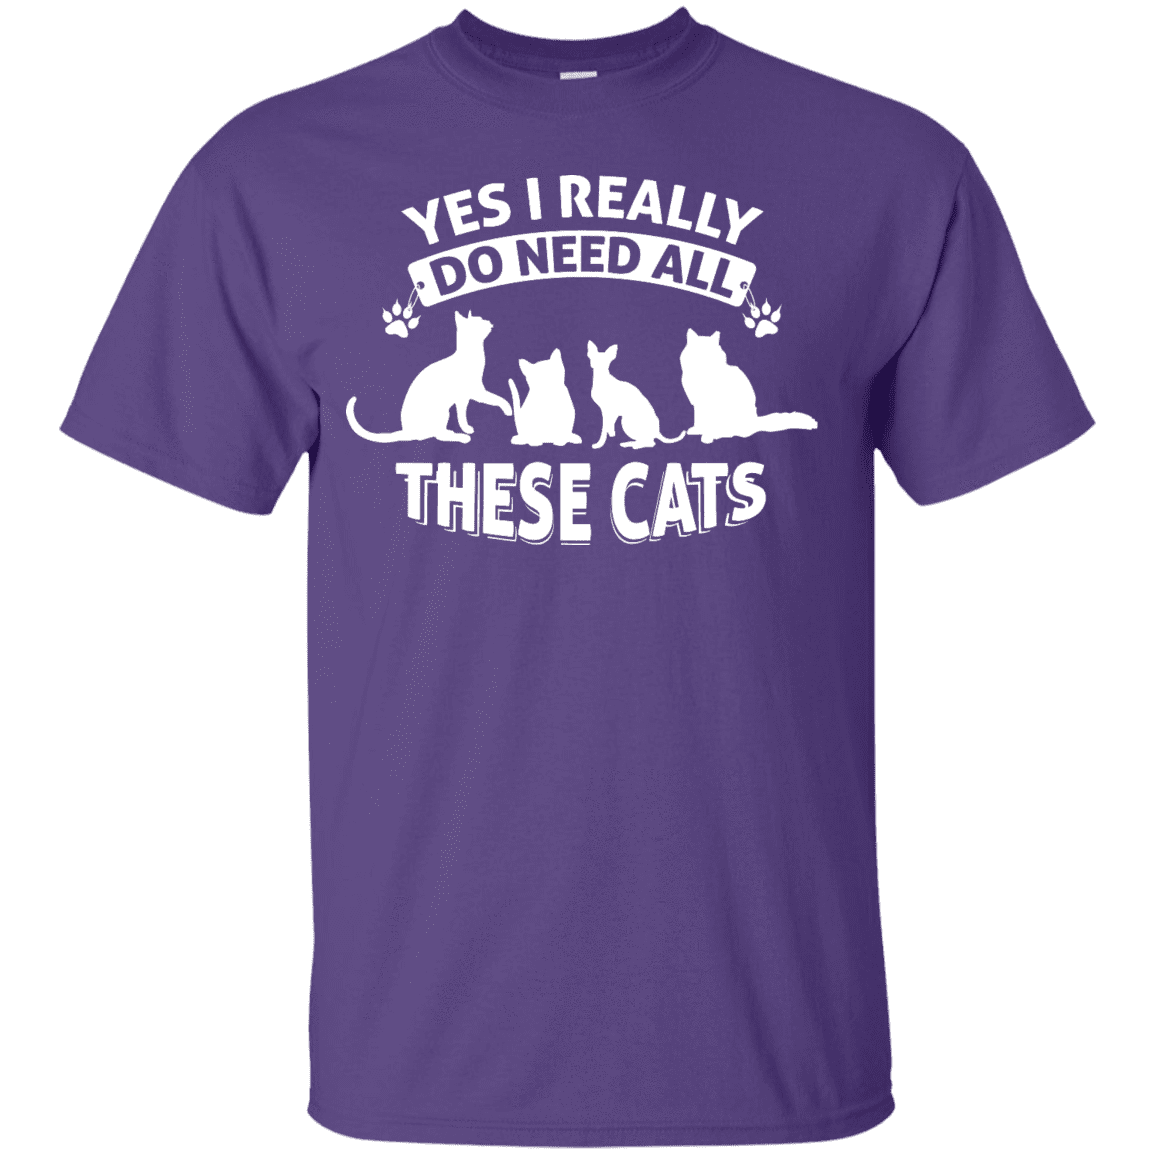 Yes I Need All These Cats - T Shirt.